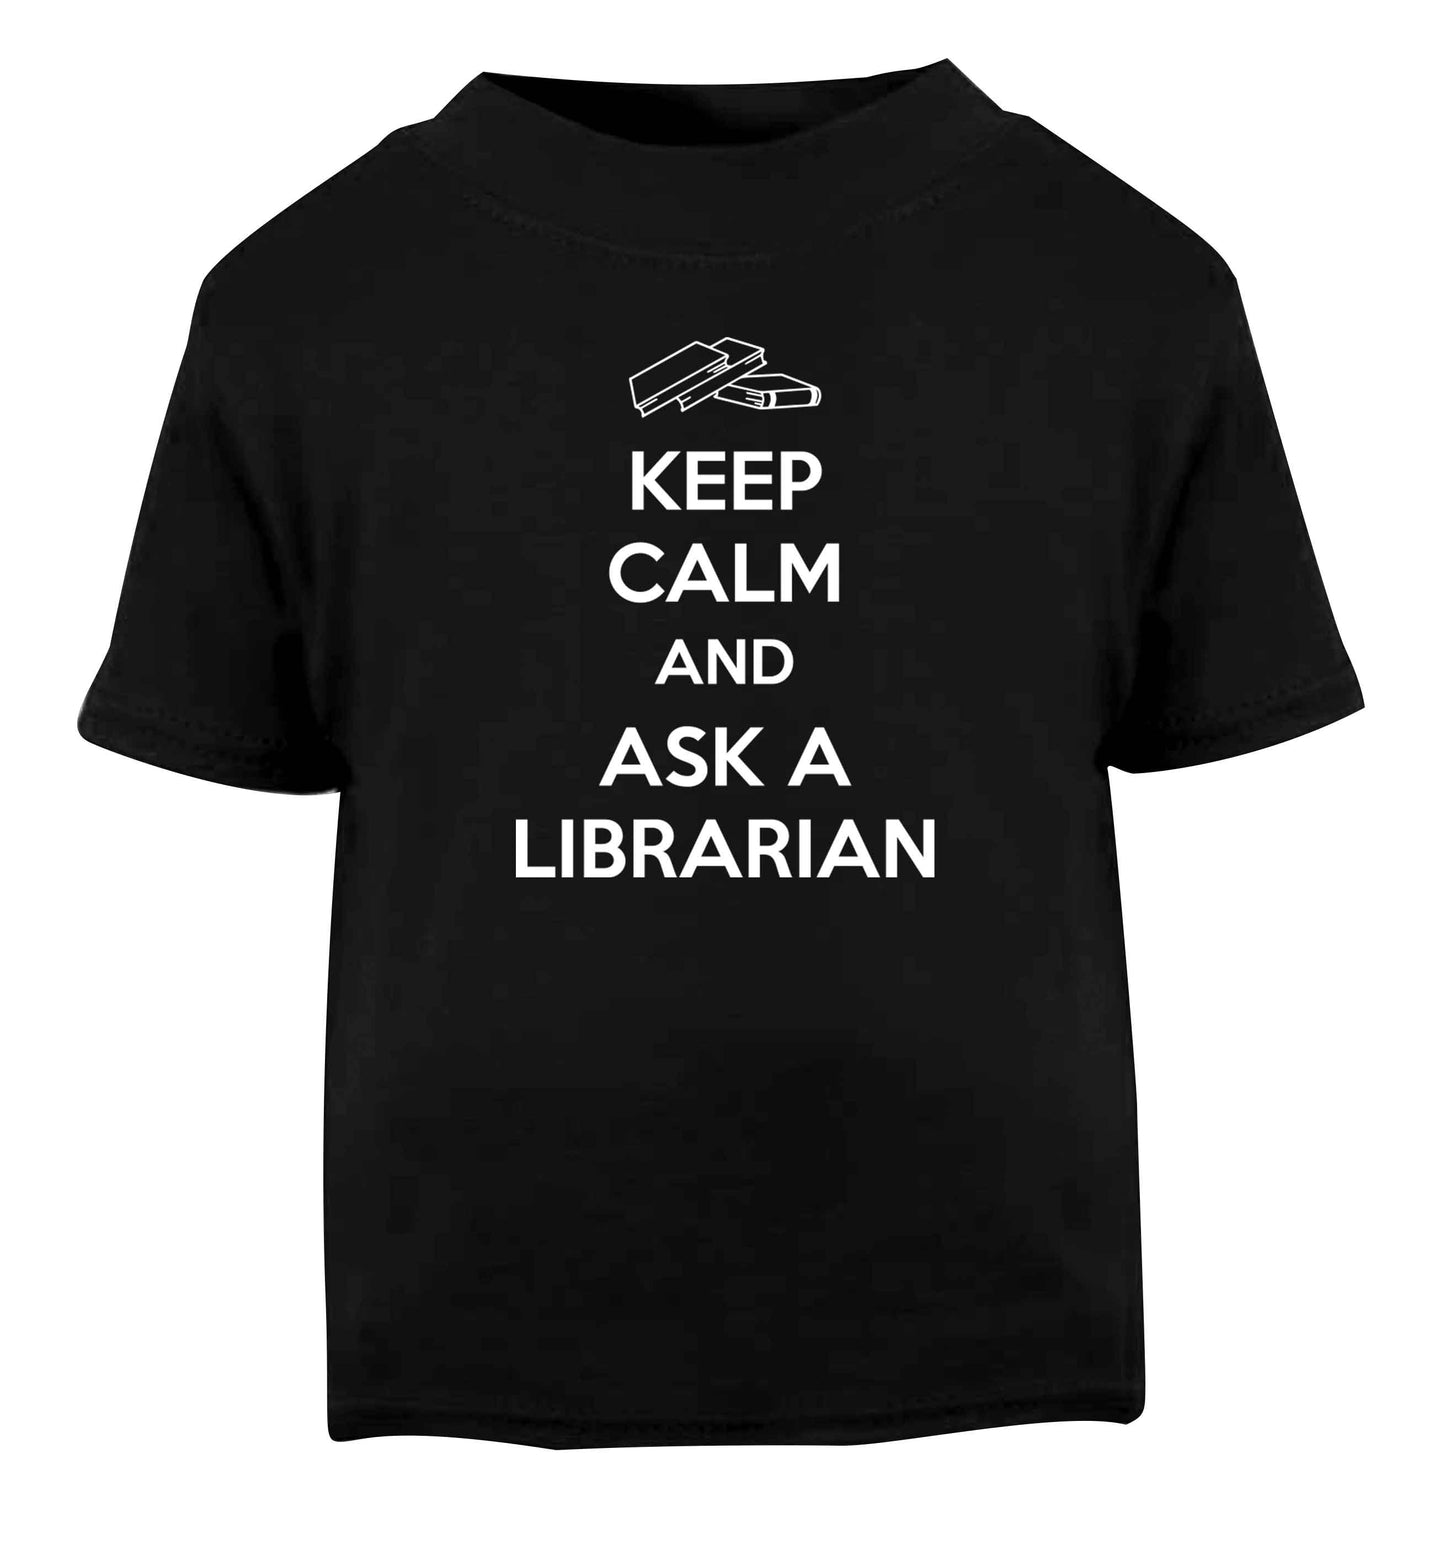 Keep calm and ask a librarian Black Baby Toddler Tshirt 2 years